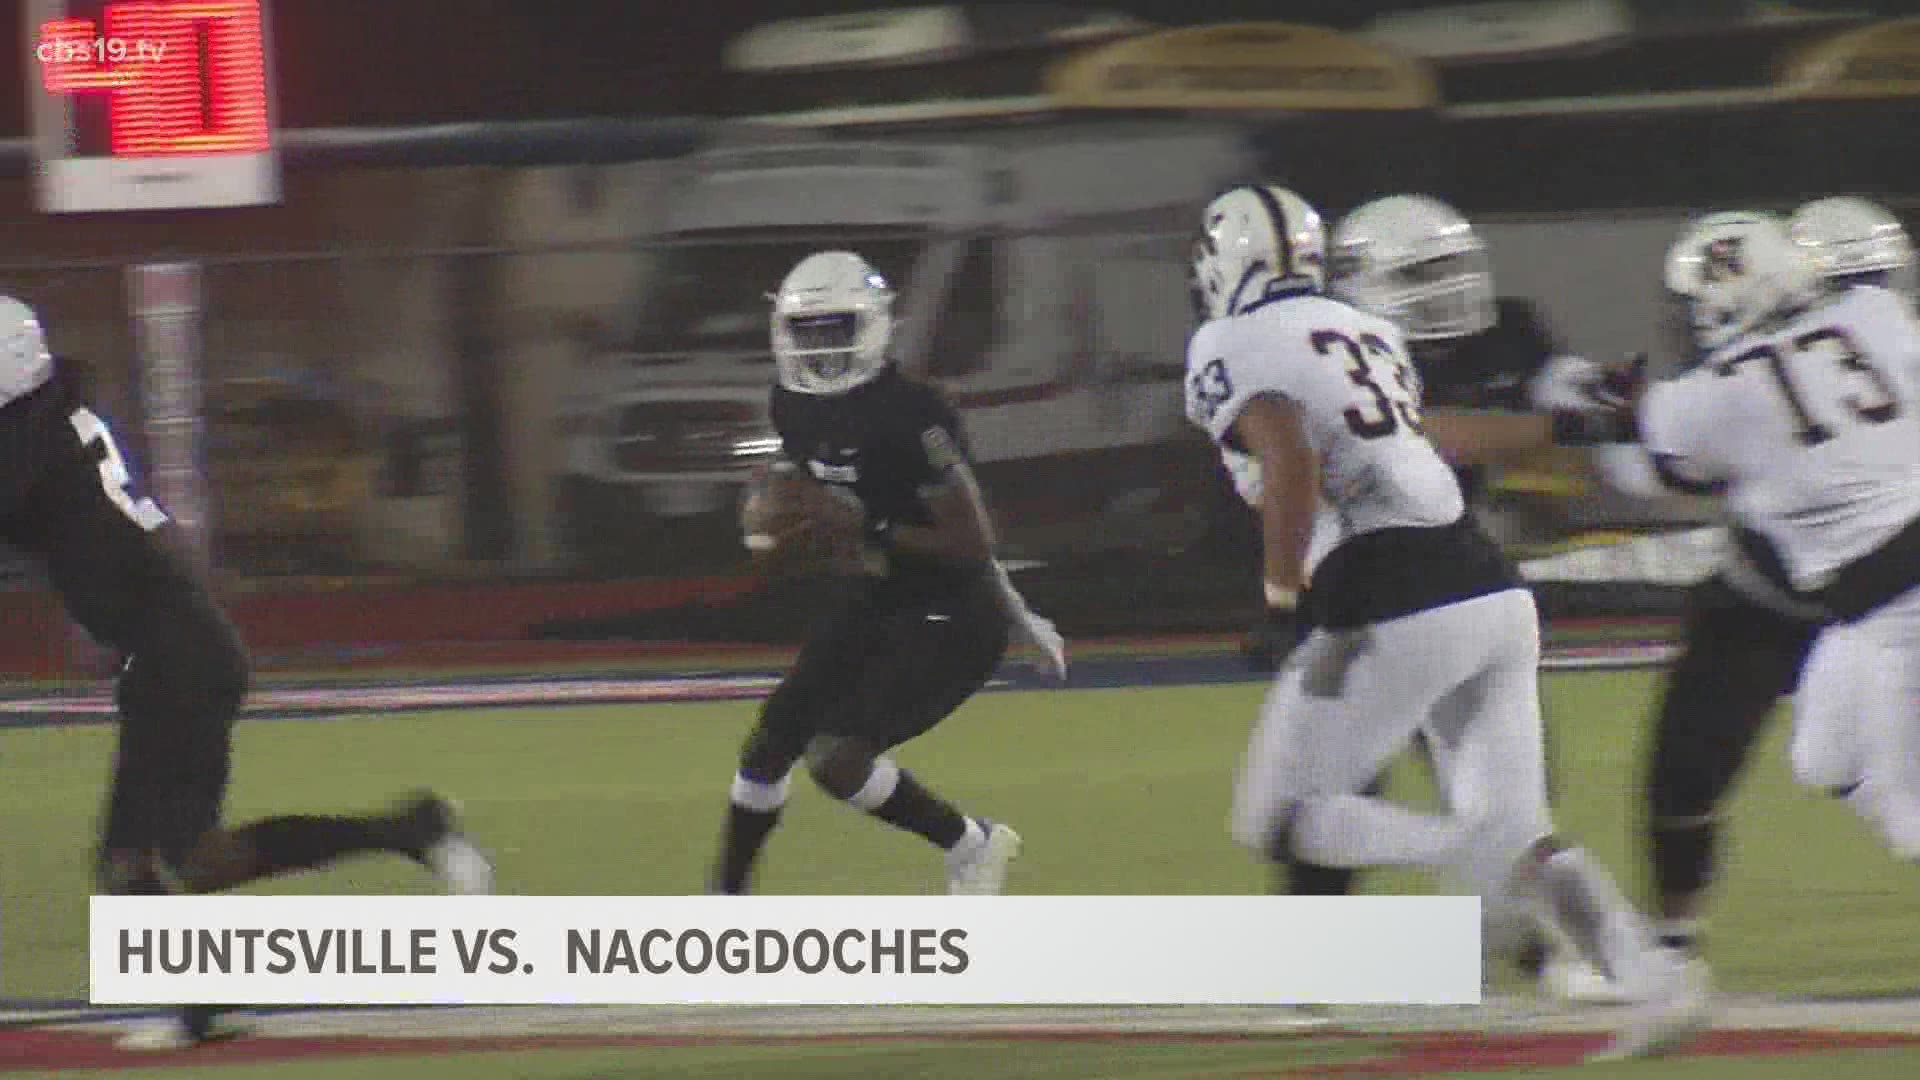 The Huntsville Hornets took on the Nacogdoches Dragons in Madisonville in the first round of the UIL High School Football Playoffs.